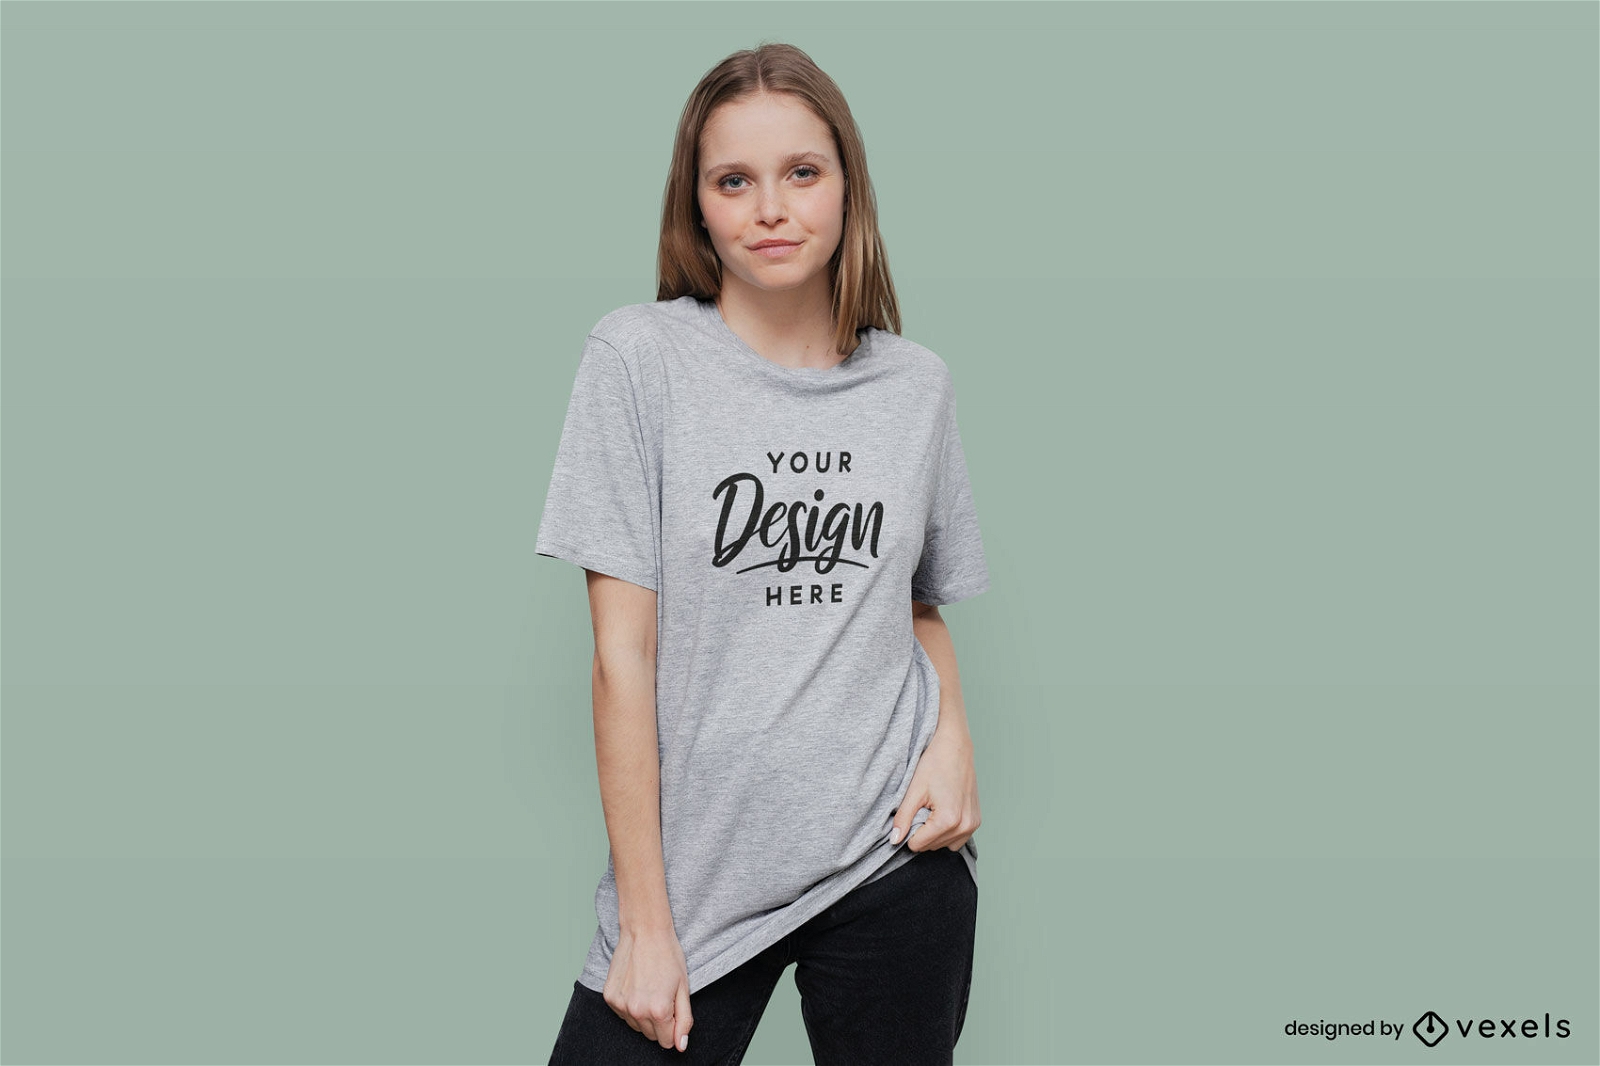 Blonde girl over solid background in t-shirt mockup